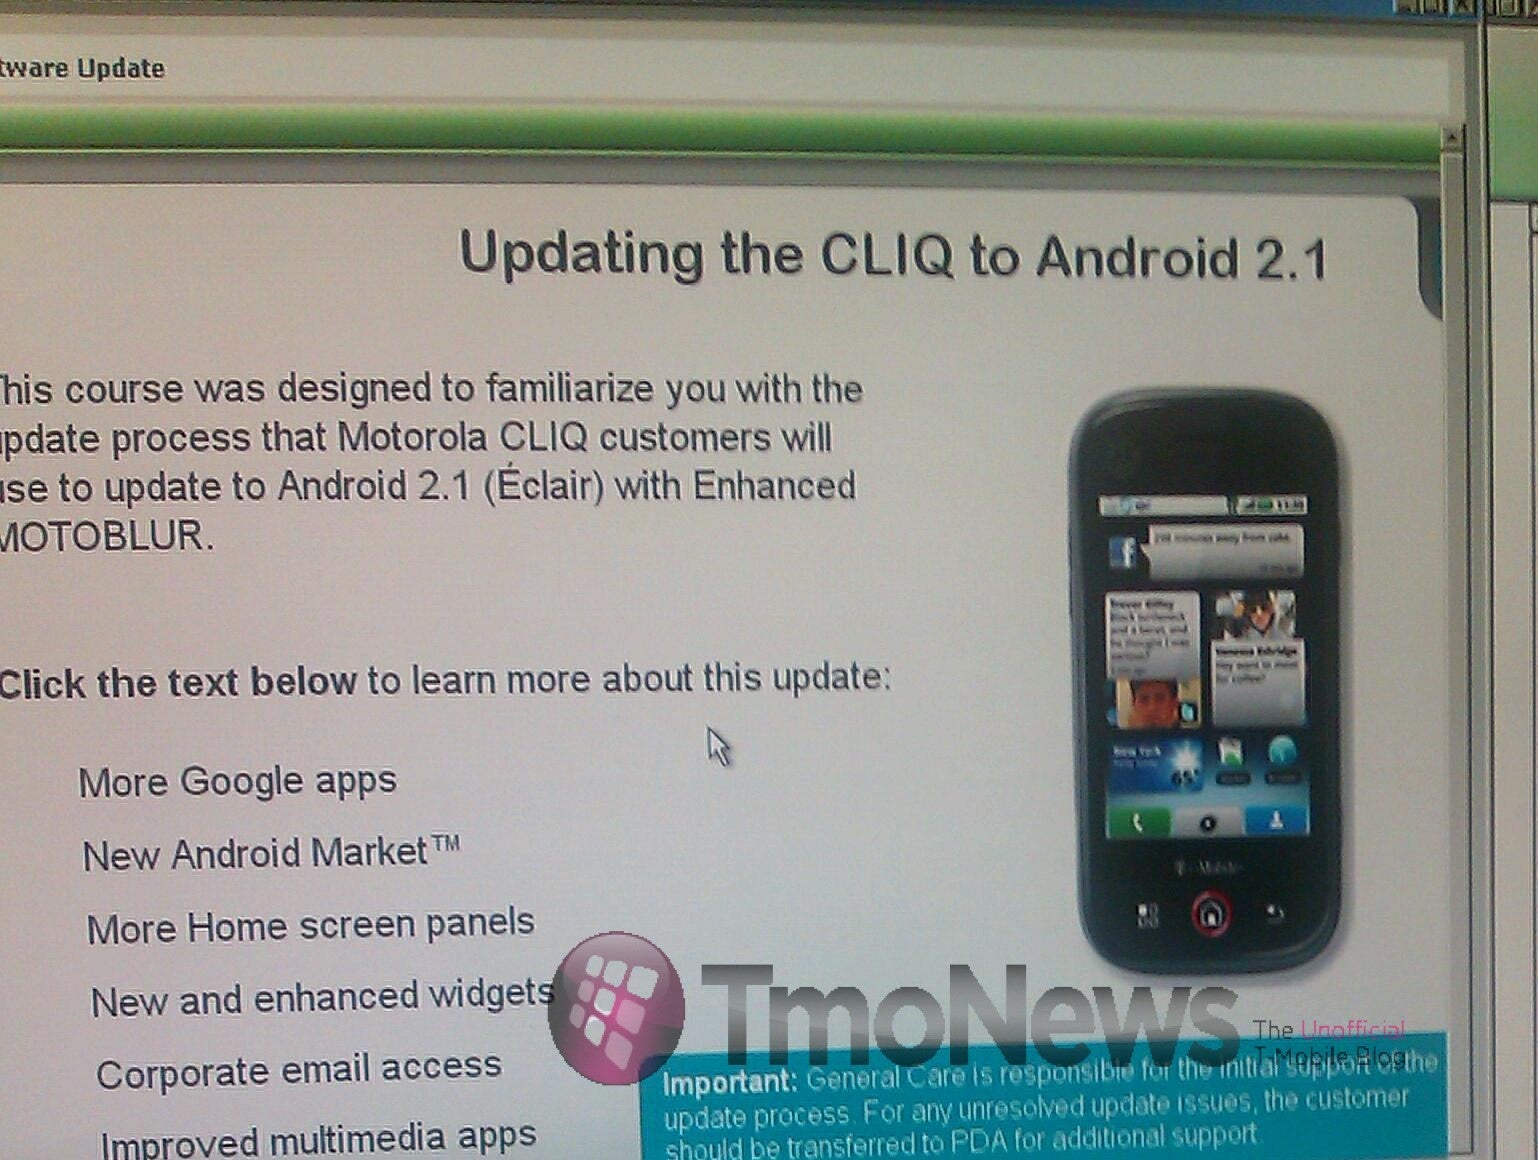 Android 2.1 update for the Motorola CLIQ is definitely coming